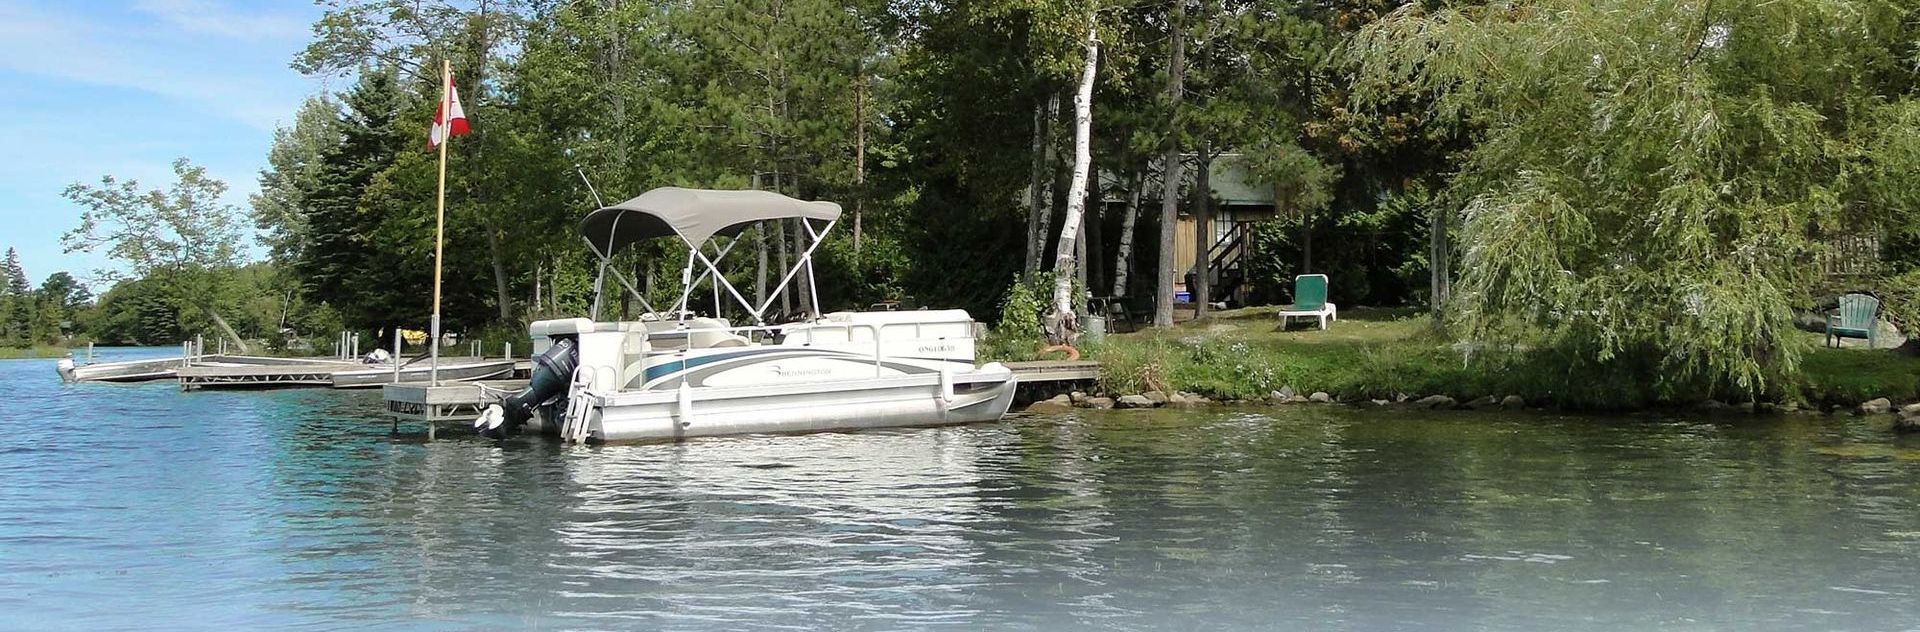 A boat is docked at a dock on a lake surrounded by trees.